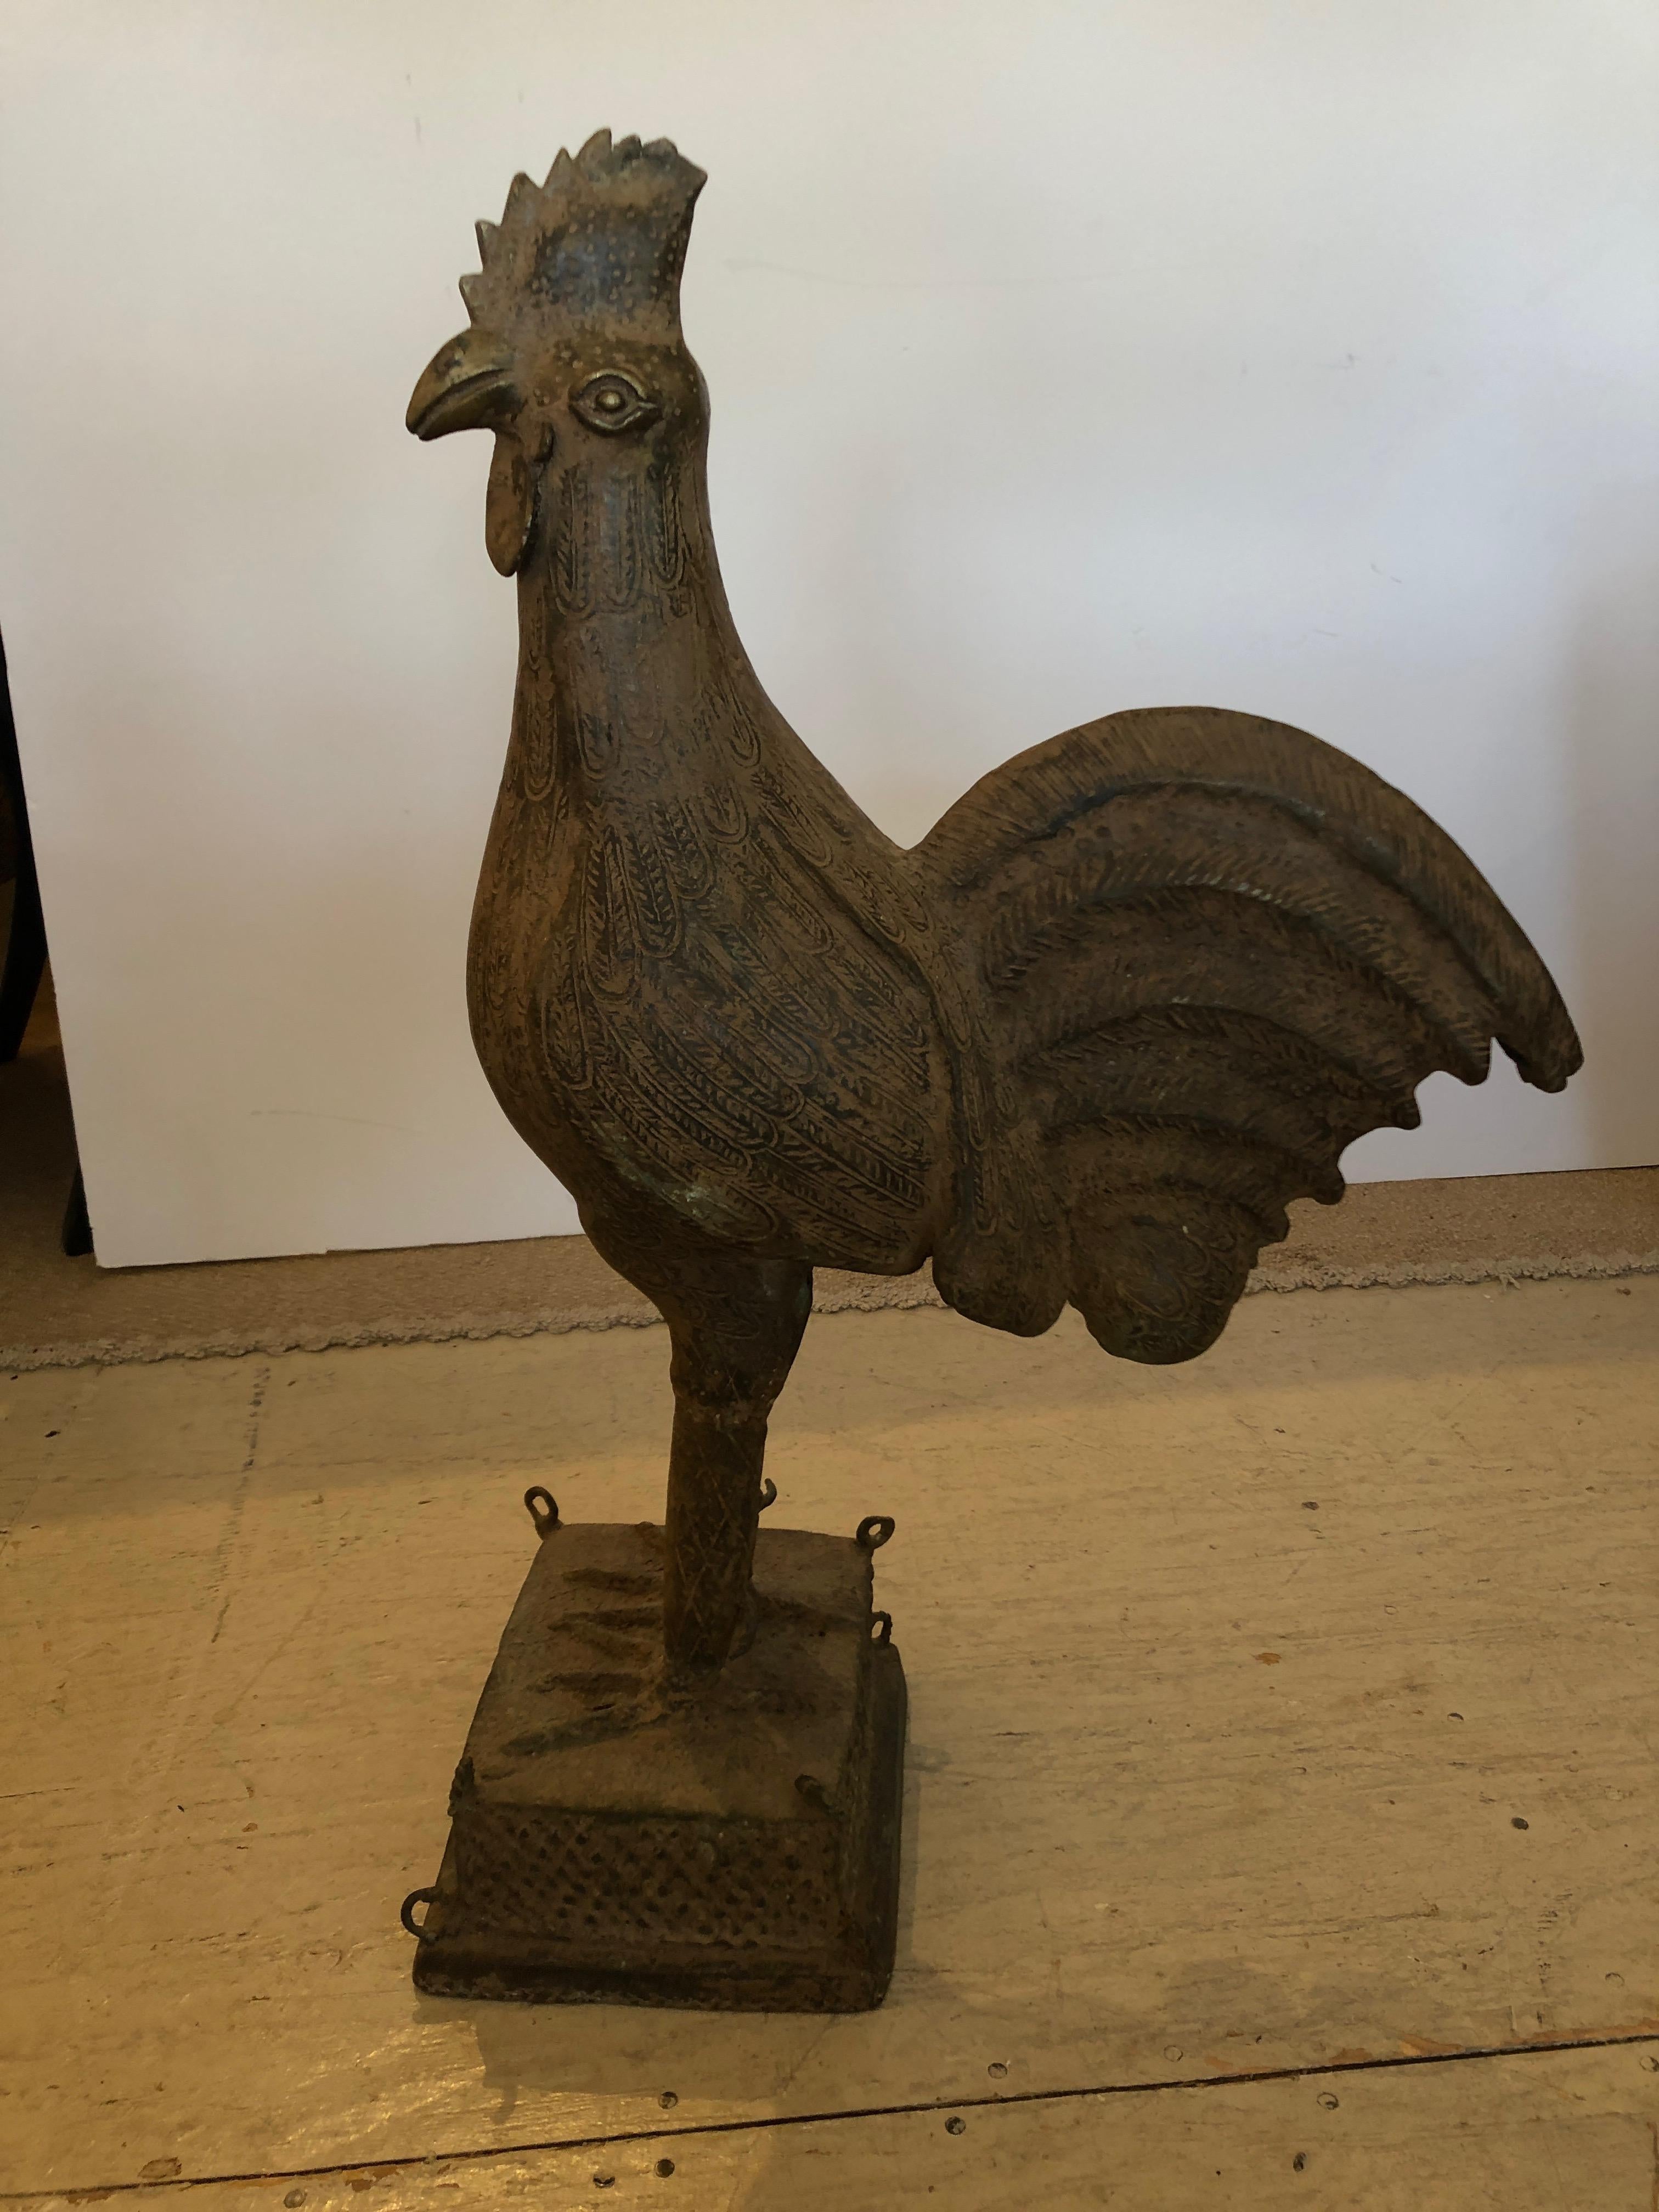 A striking bronze rooster having wonderful etched details on the body and tail. Base is 9 inches square.